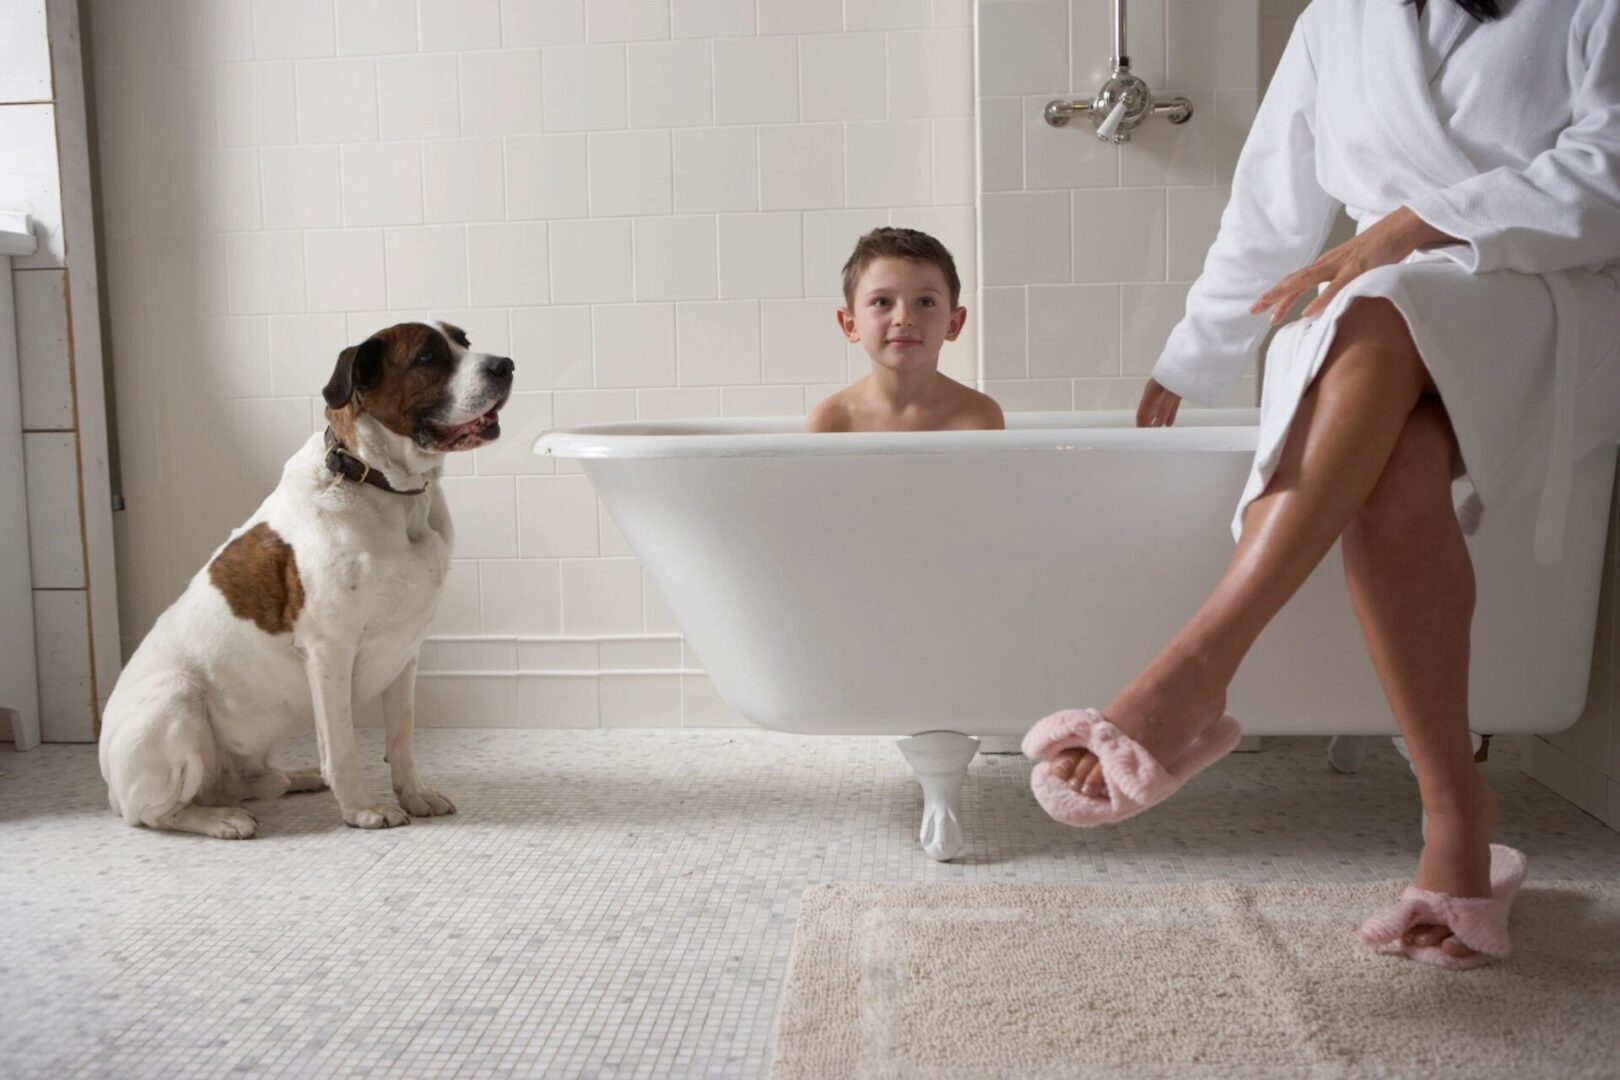 A dog and two children in the bathroom